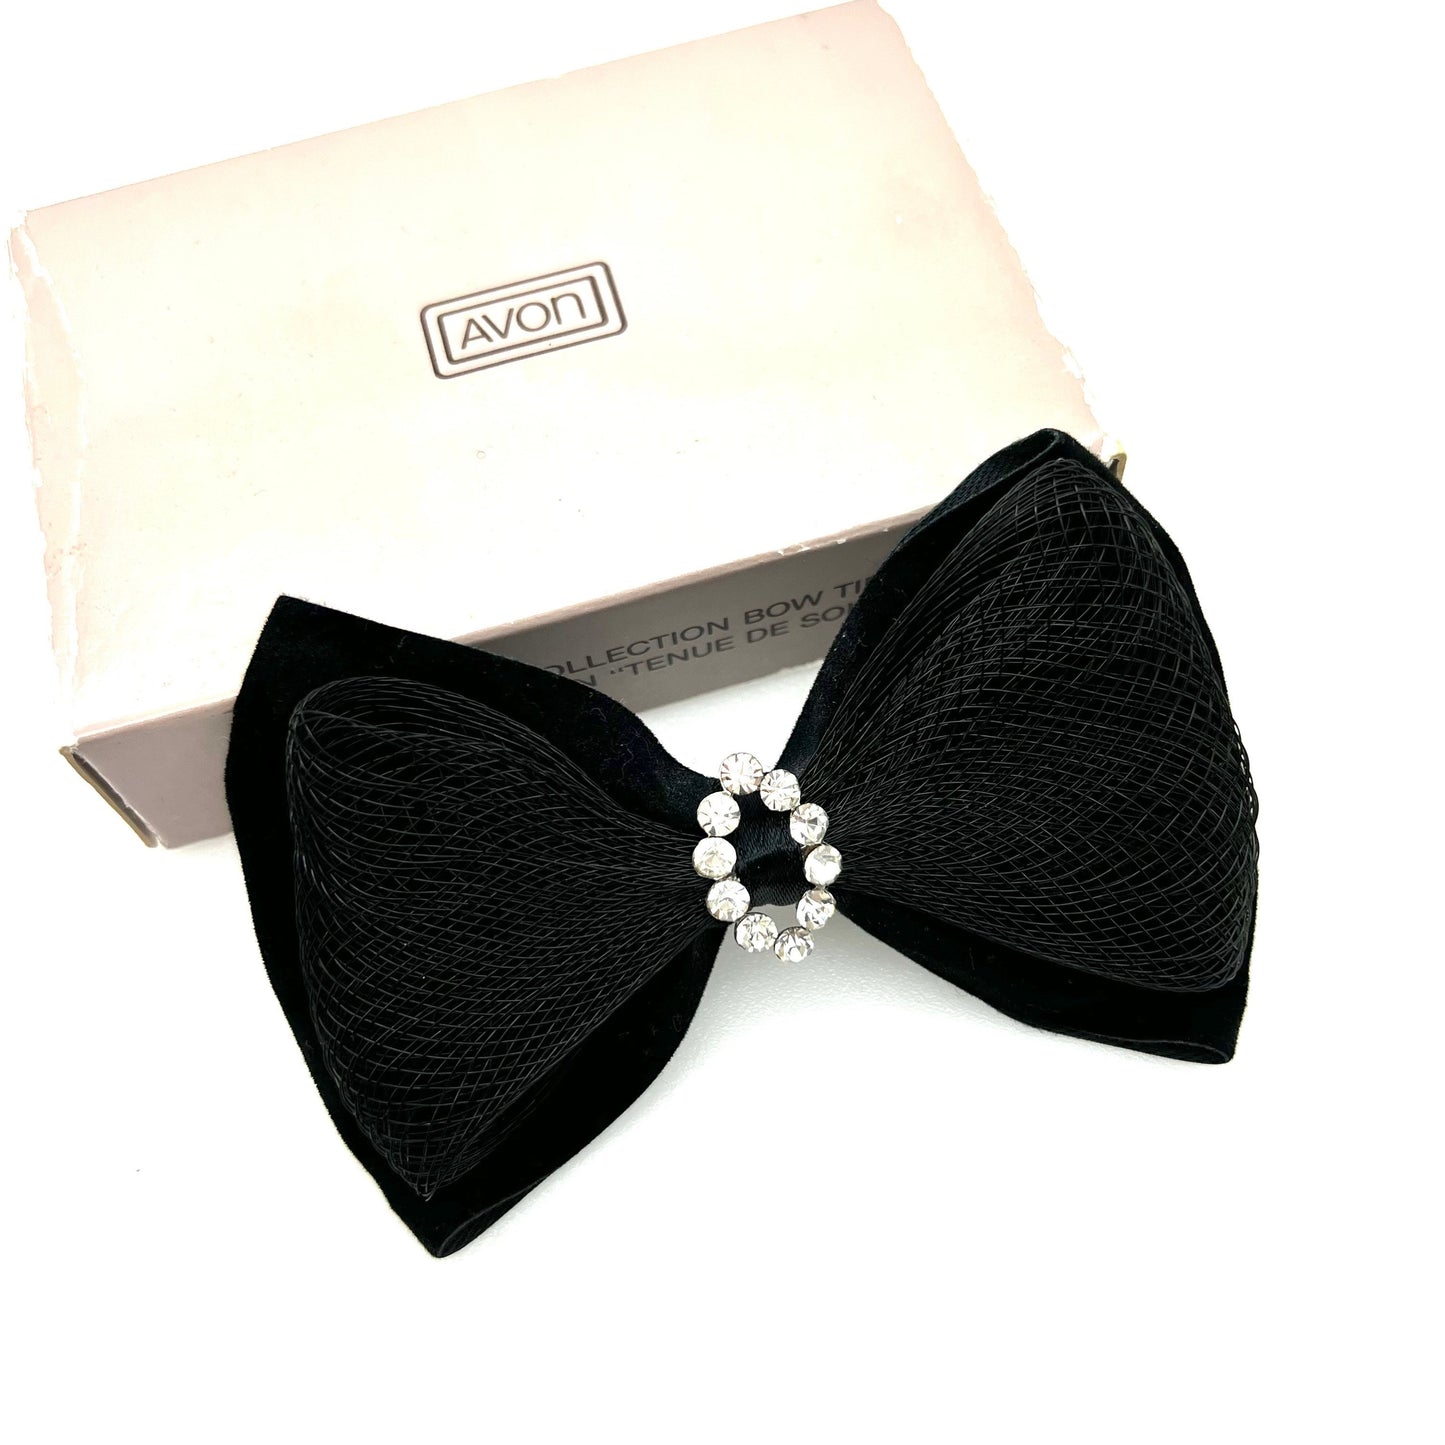 Avon Evening Collection Bow Tie NOEUD PAPILLON Tenue De Soiree Made By Cherry With Original Box